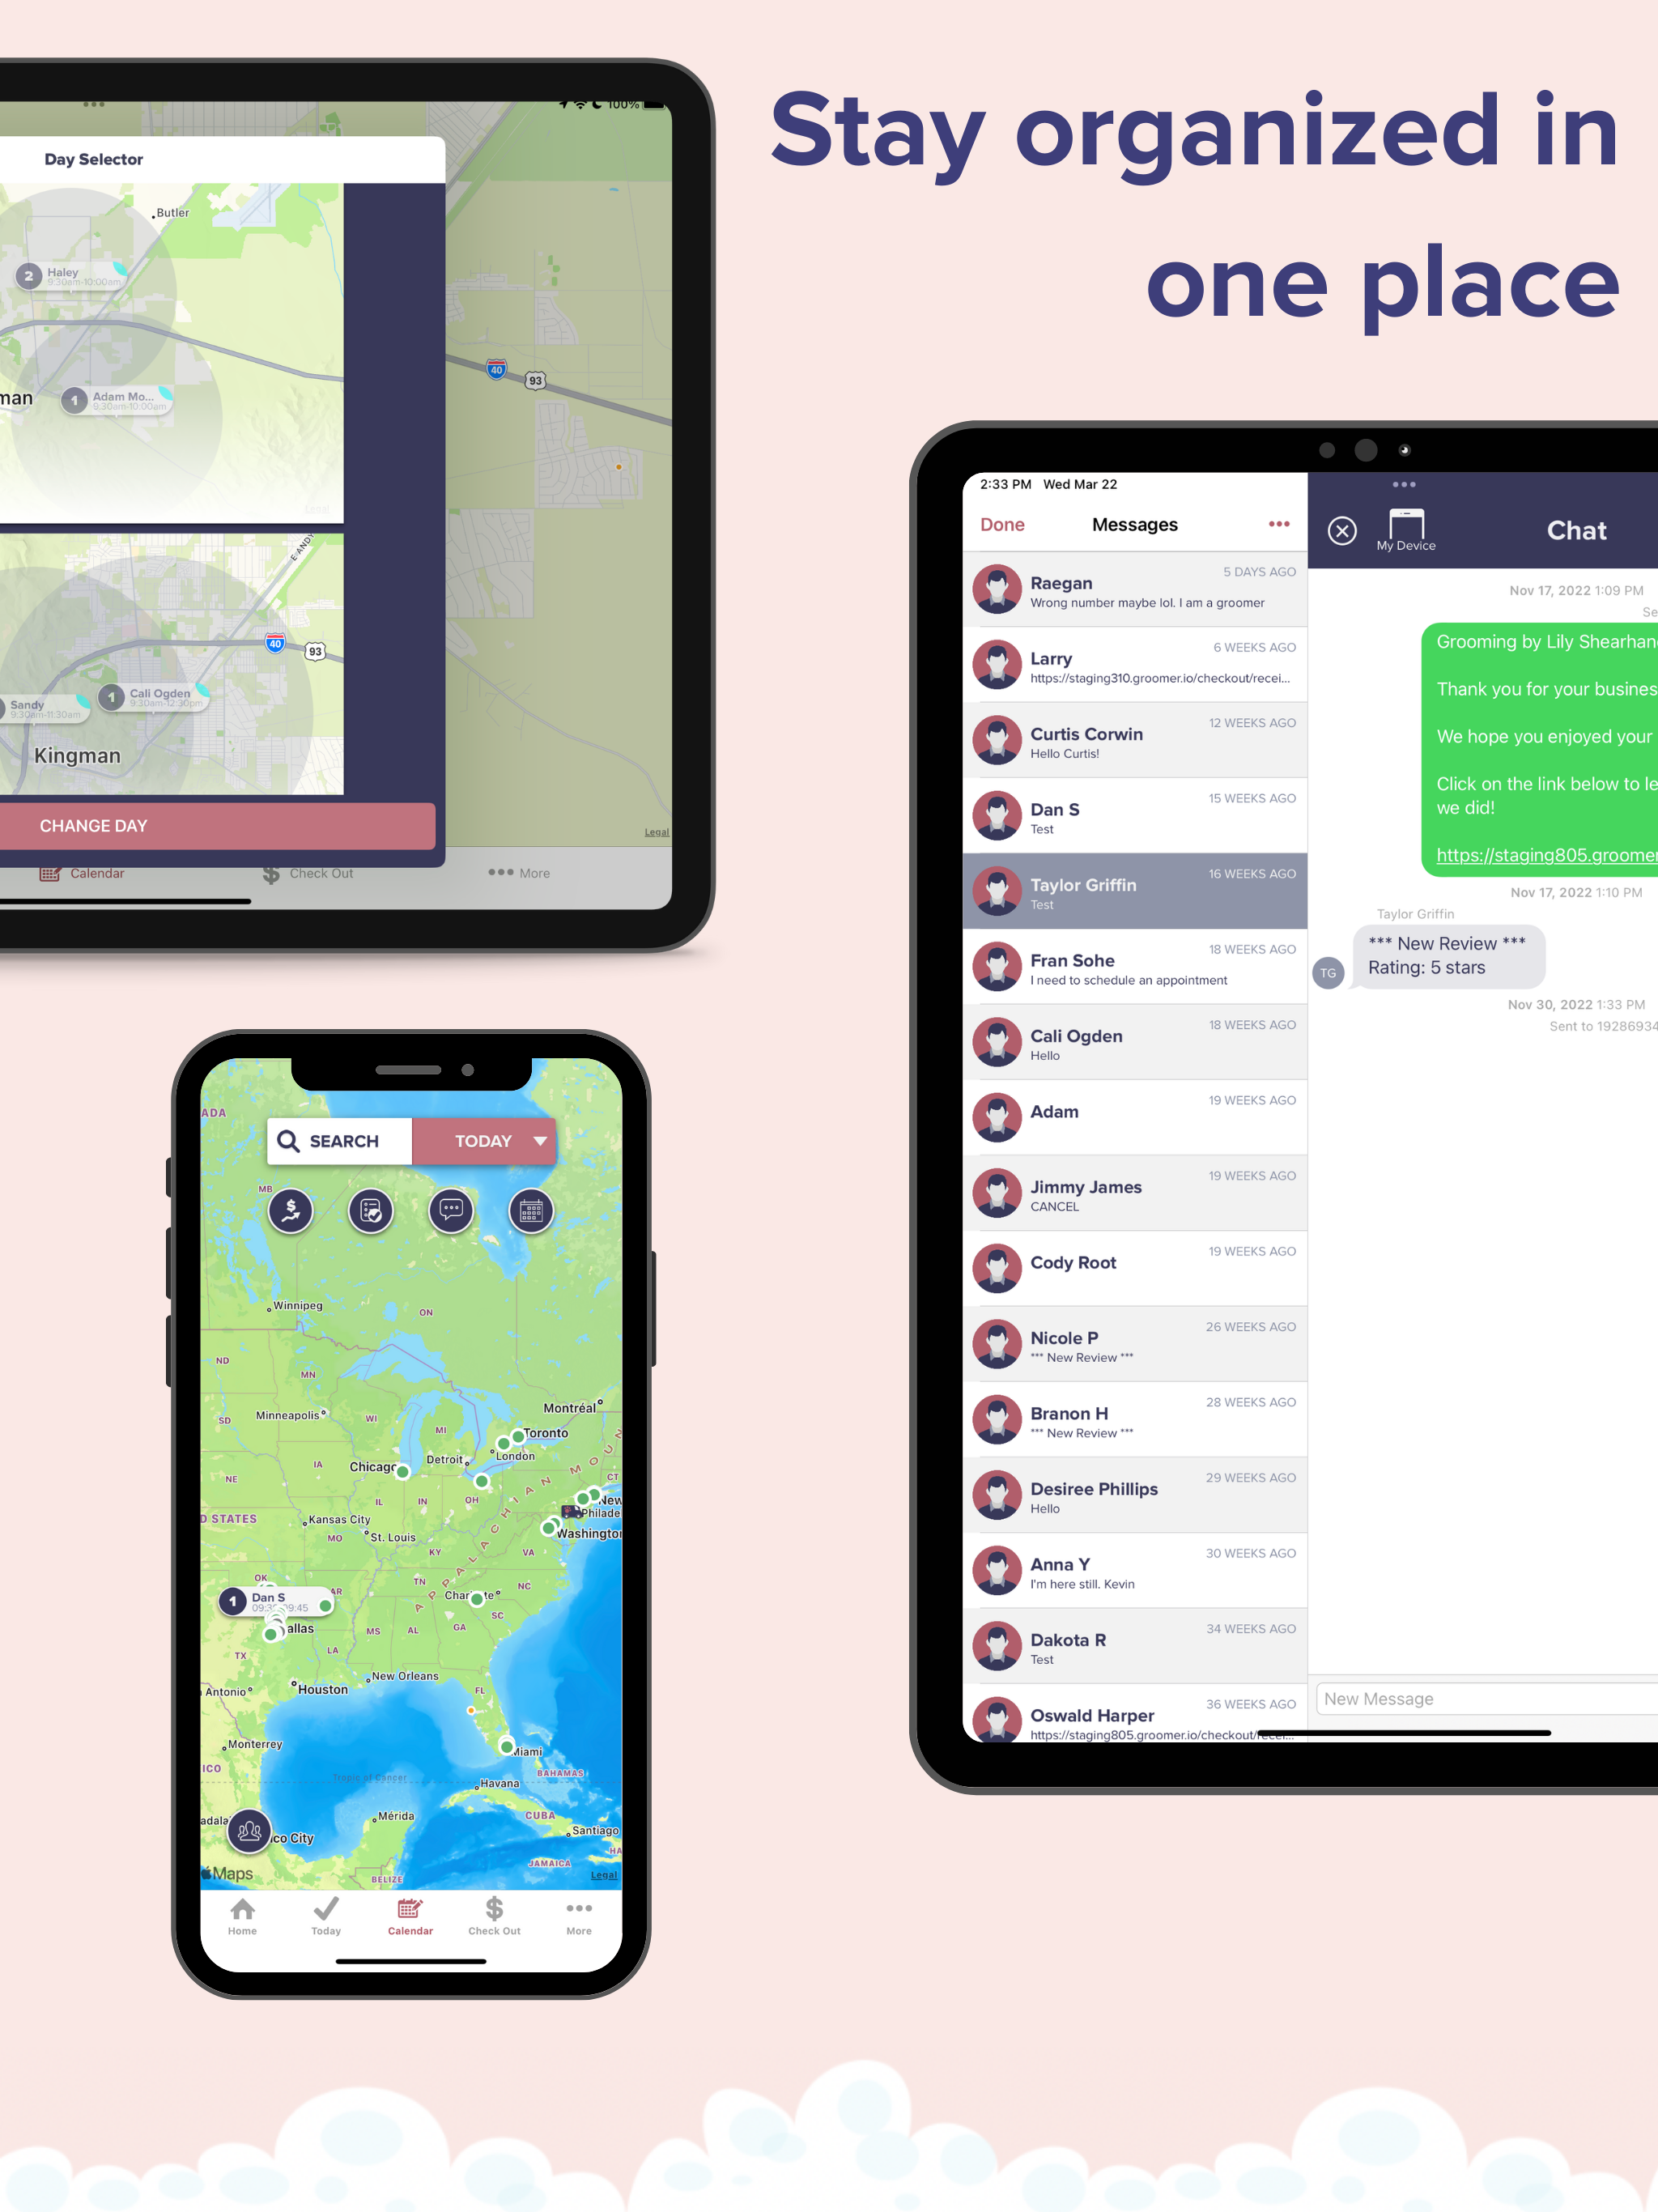 With multiple map views and UNLIMITED texts to your pets, you can stay organized in one place.